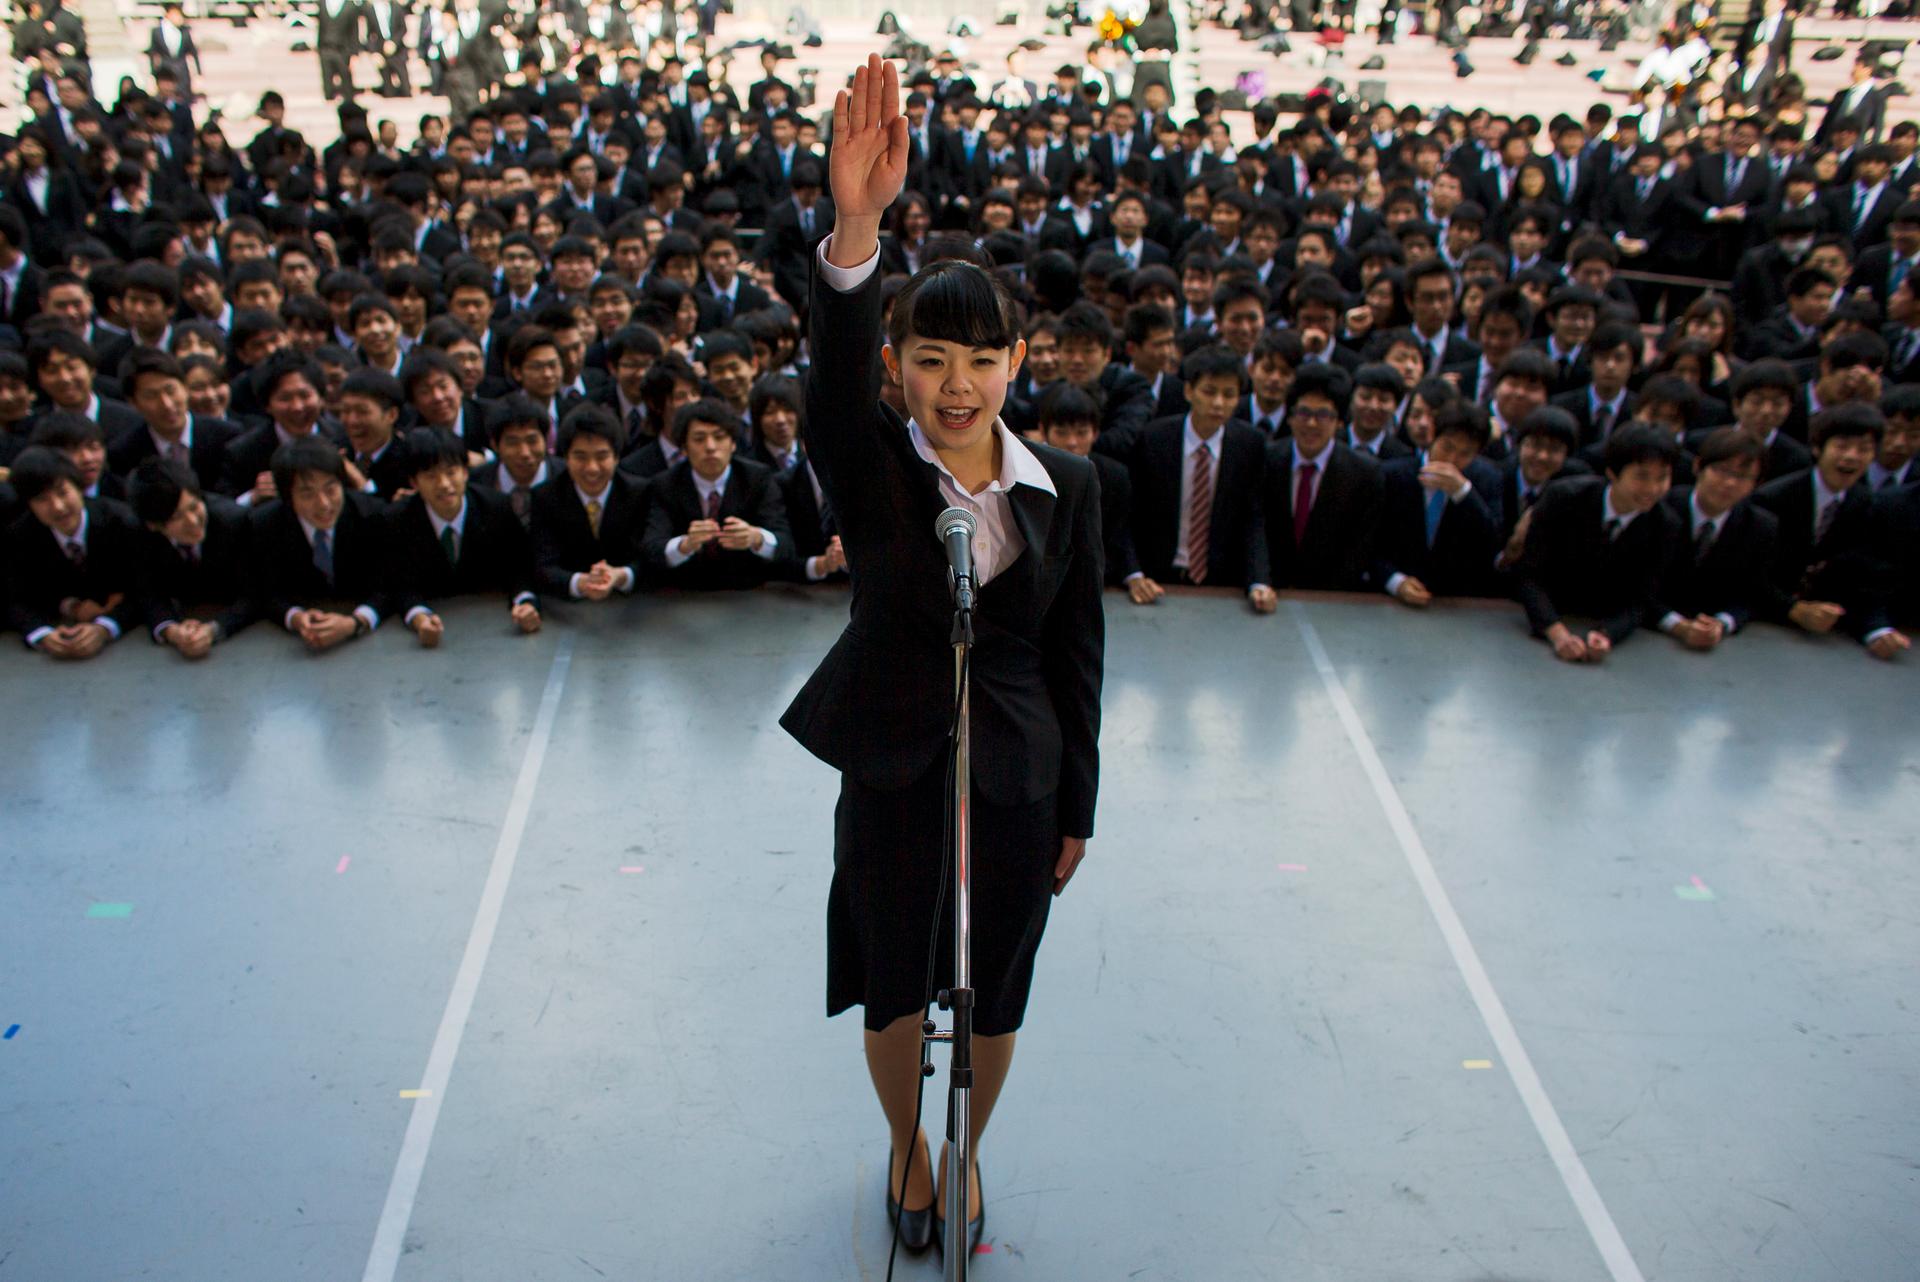 A Japanese college graduate publicly promises that she will do her best in trying to find work during a job-hunting rally at an outdoor theatre in Tokyo.